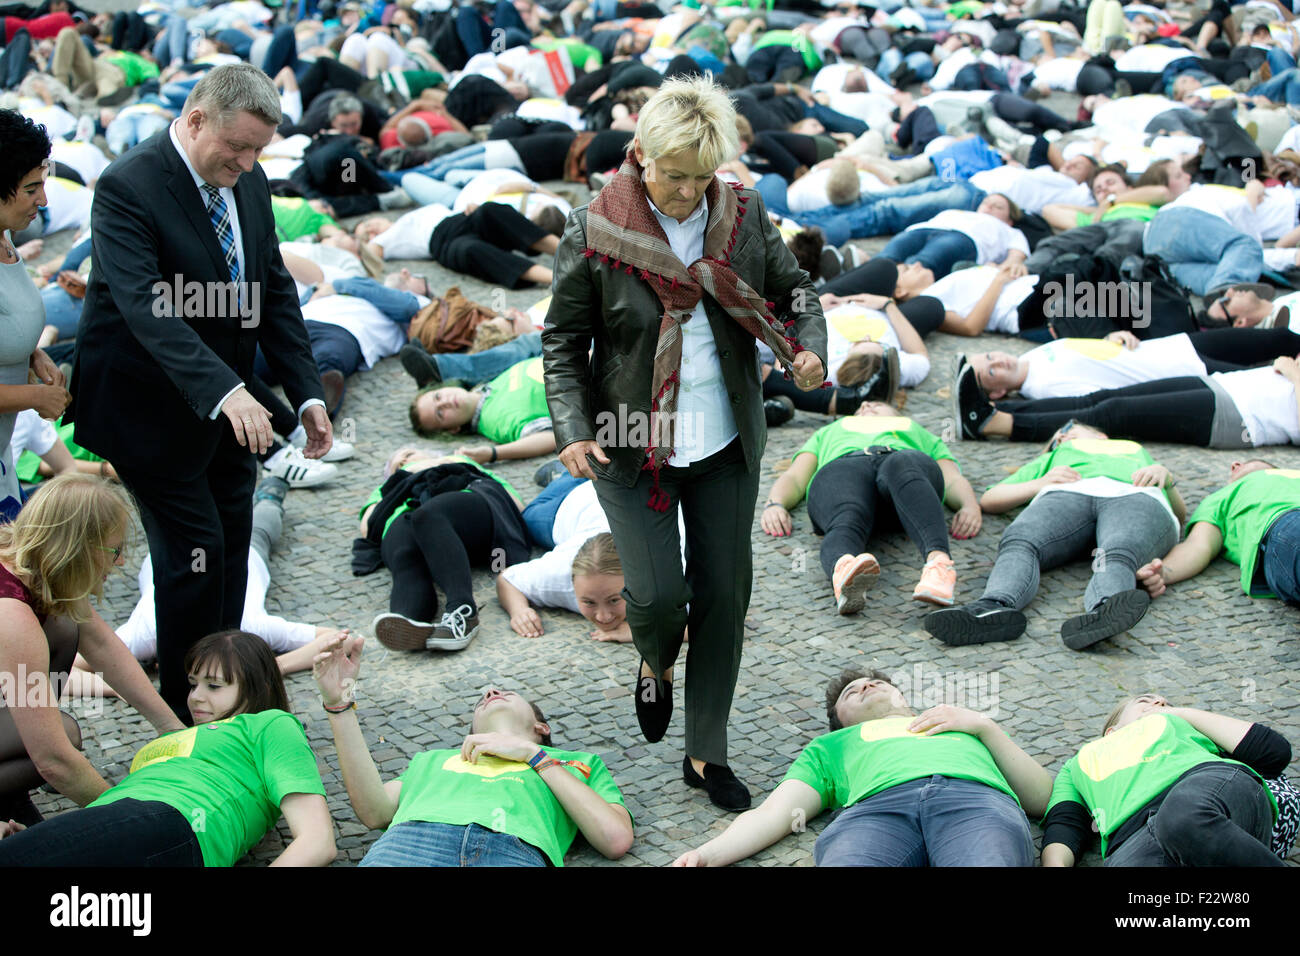 Berlin, Germany. 10th Sep, 2015. German Health Minister Hermann Groehe (L, CDU) and Green politician Renate Kuenast help up young people who have been lying on the ground as part of the '600 Lives' campaign in front of the Brandenburg Gate in Berlin, Germany, 10 September 2015. The campaign is part of World Suicide Prevention Day. The number 600 represents the 600 young people who commit suicide each year in Germany. Credit:  dpa picture alliance/Alamy Live News Stock Photo